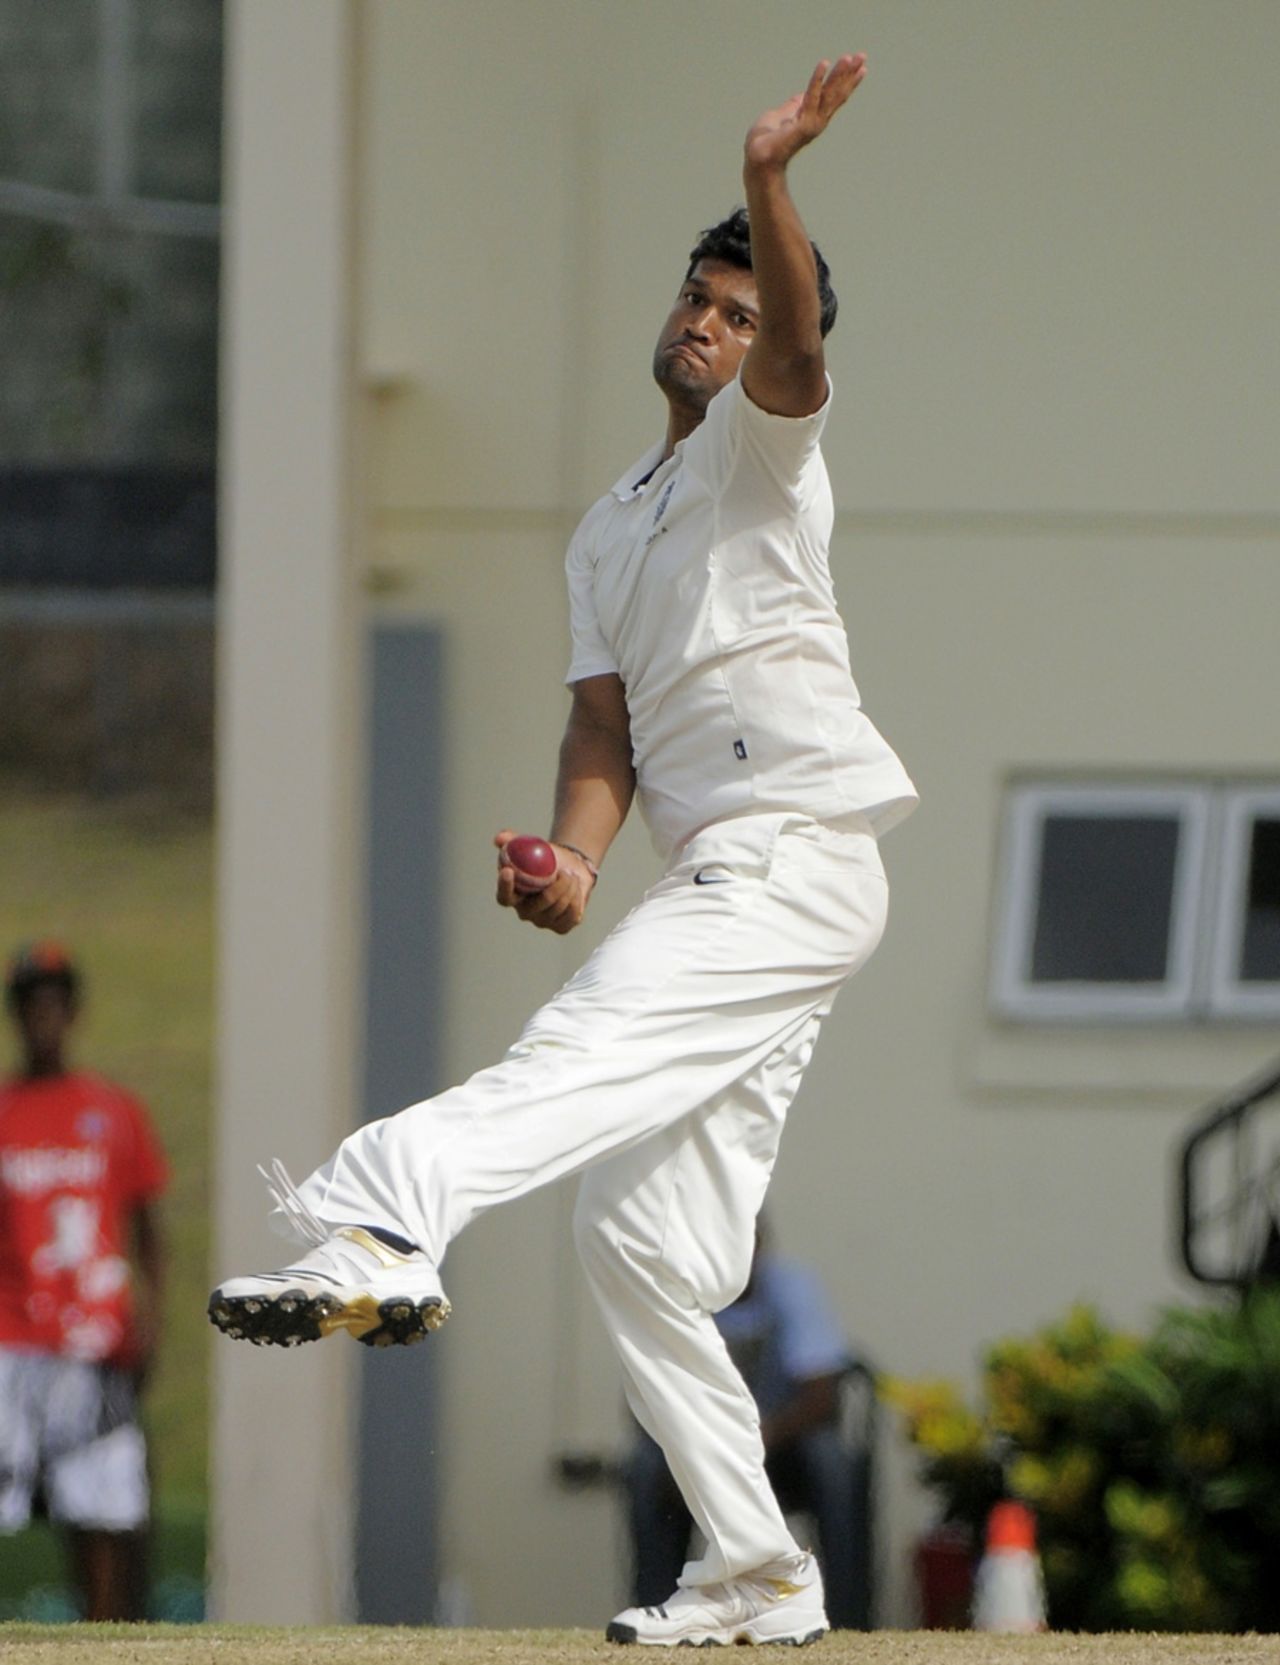 India A's Jalaj Saxena in delivery stride, West Indies A v India A, 3rd unofficial Test, St Lucia, 2nd day, June 17, 2012